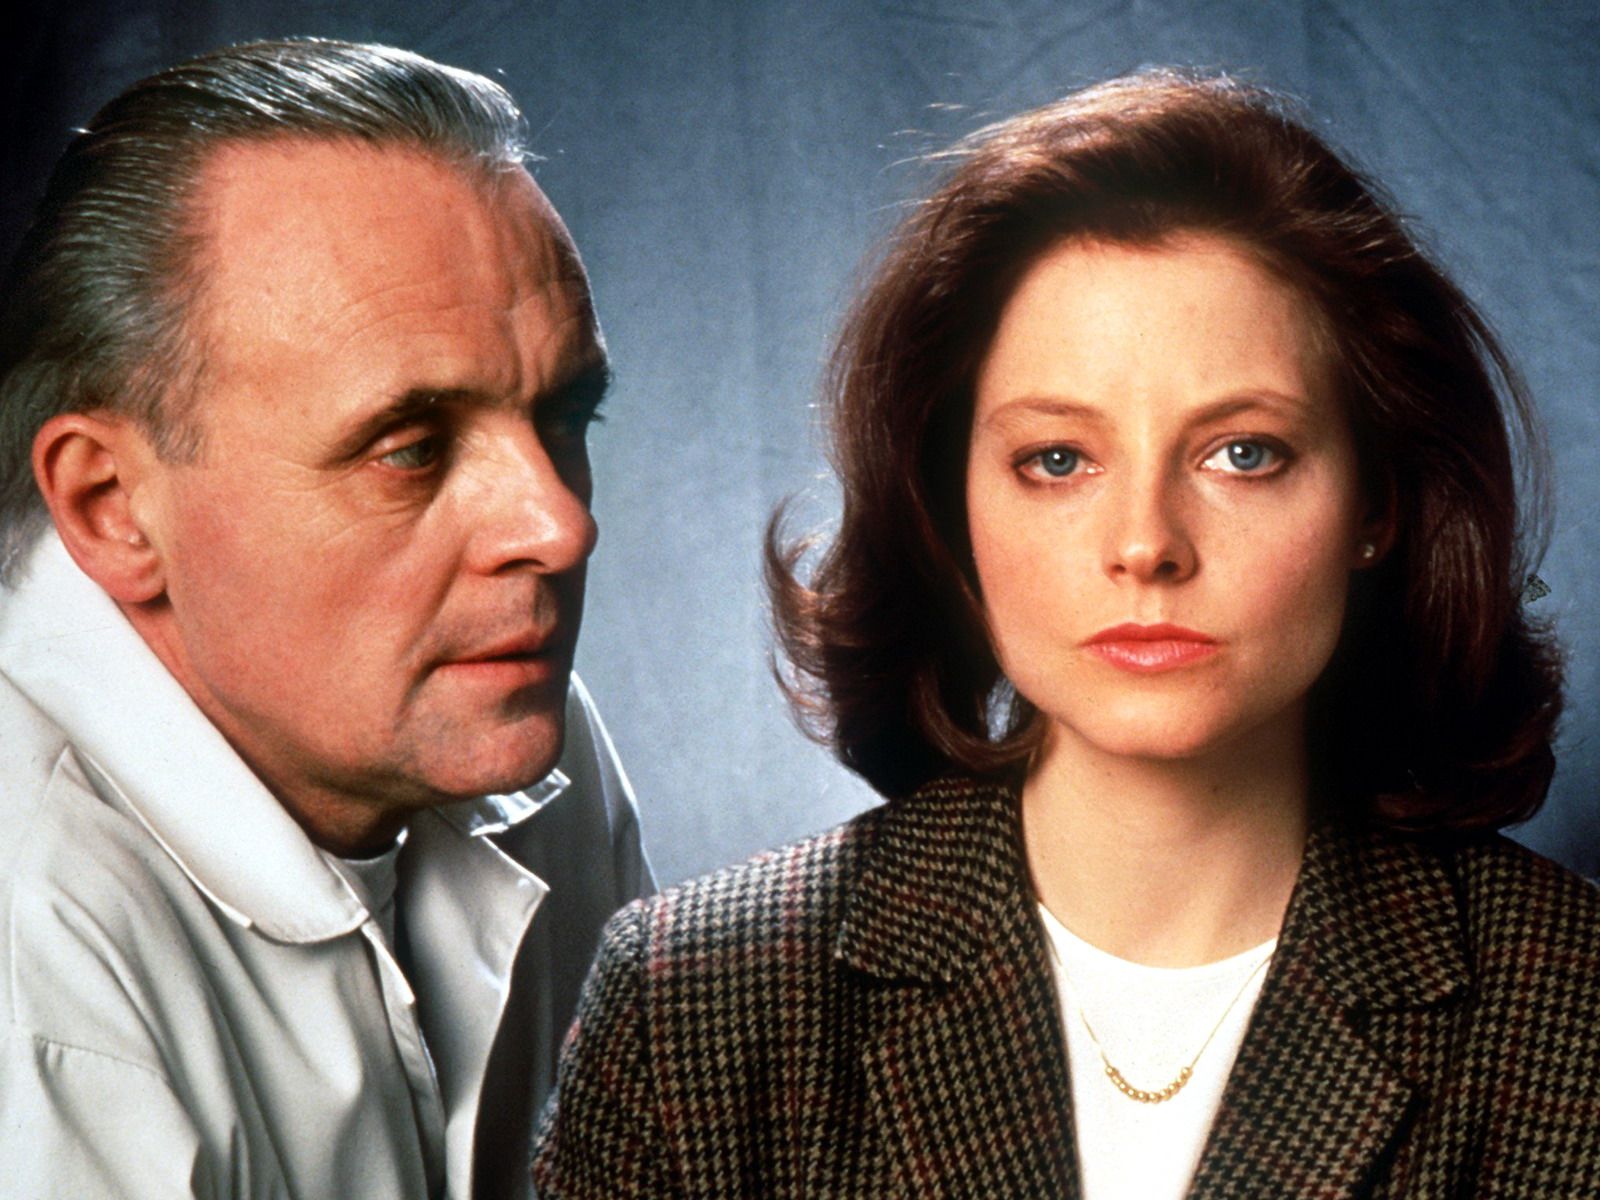 Jodie Foster Was Scared Of Anthony Hopkins During Shoot Of ‘The Silence of the Lambs’